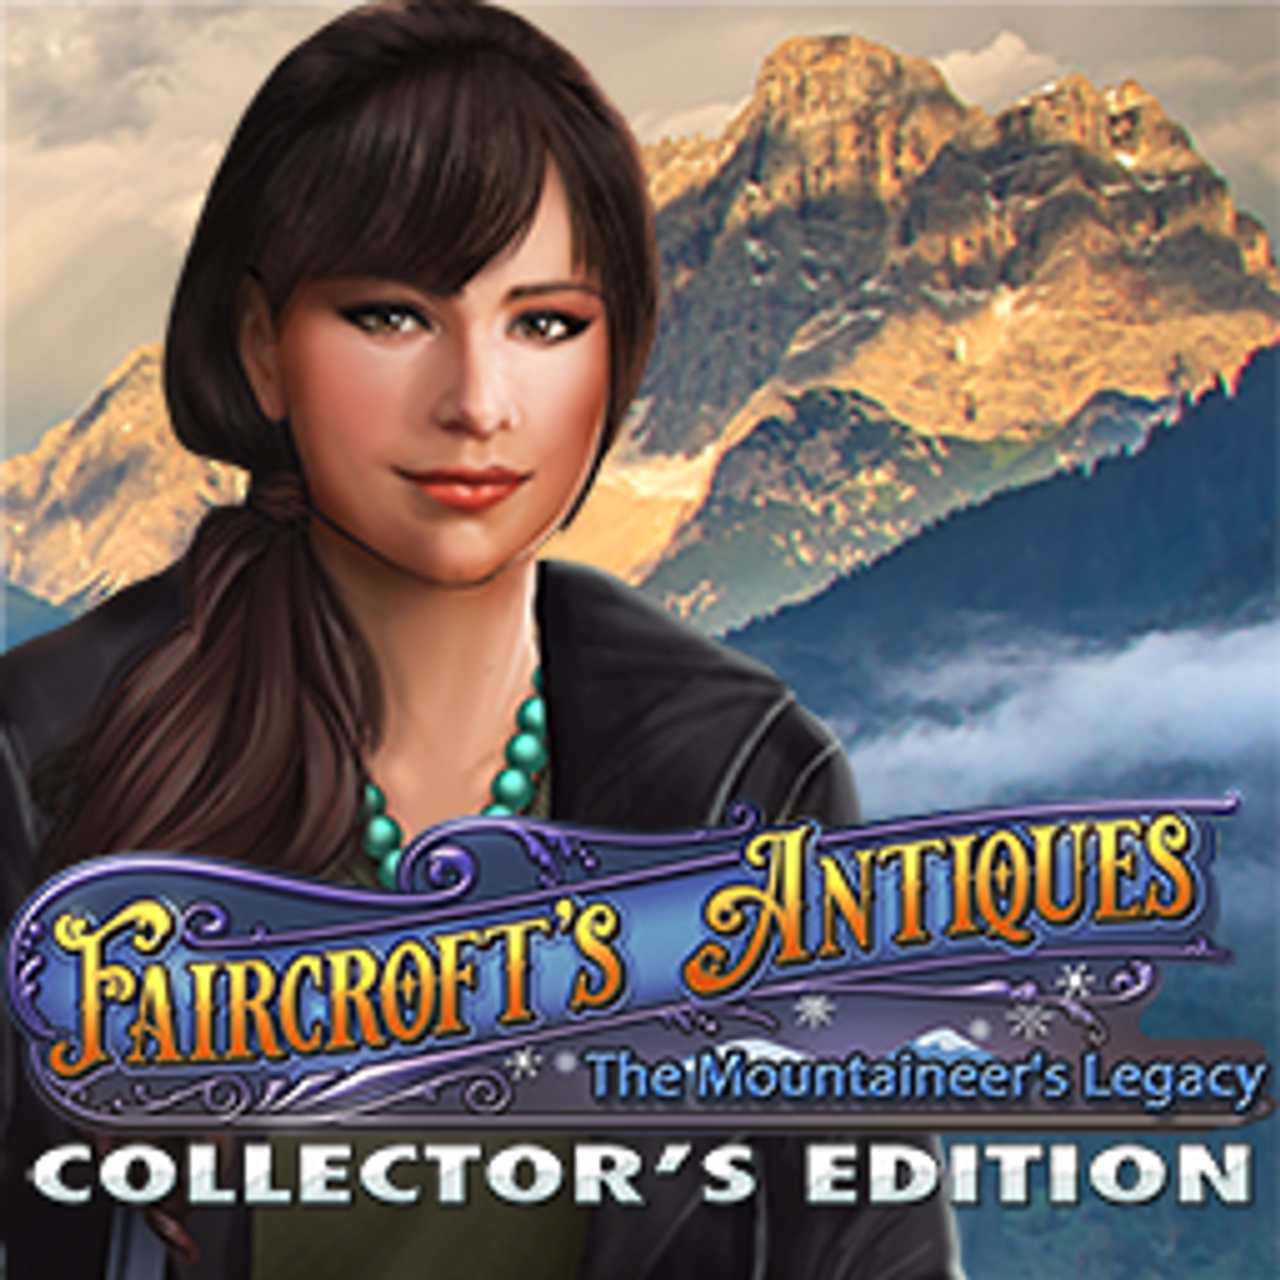 Faircroft's Antiques: The Mountaineer's Legacy Collector's Ed.